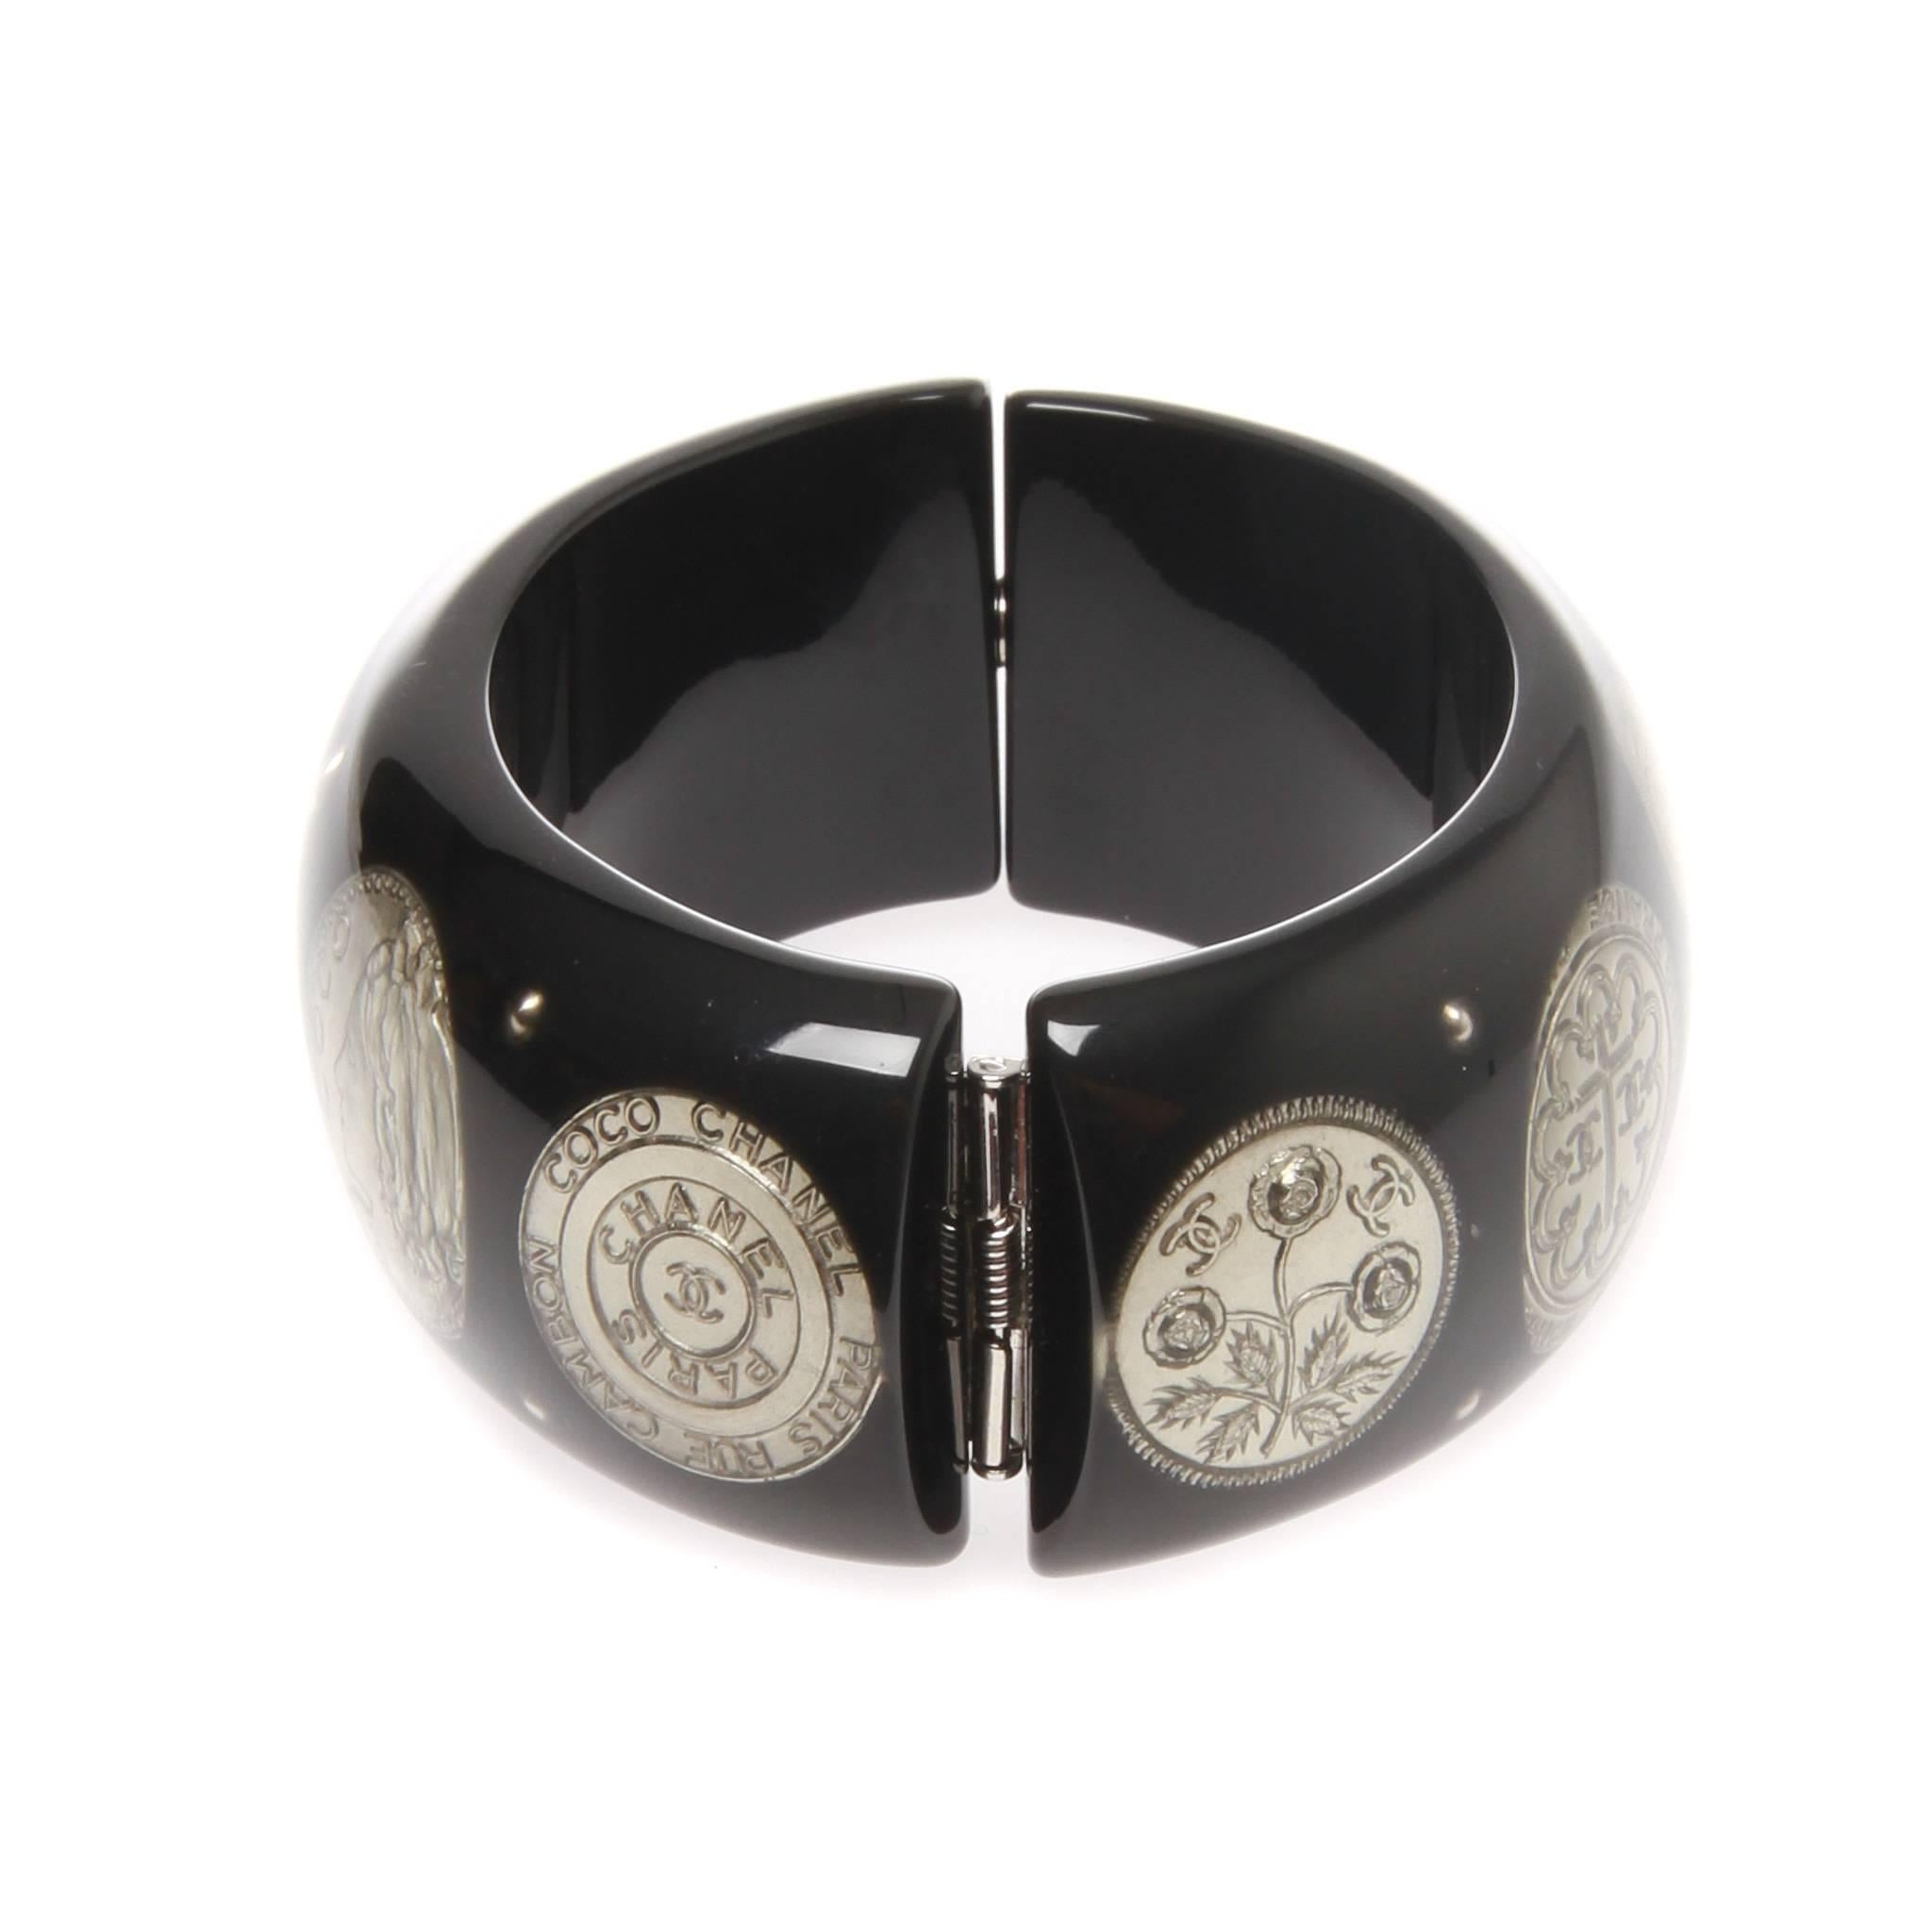 CHANEL BLACK RESIN SILVER PLATED COINS CUFF BANGLE

An exquisite black resin silver plated coins cuff bangle from the 2009 Spring CHANEL collection.
Intricately crafted with beautiful silver plated coin embellished within the black resin cuff.
It